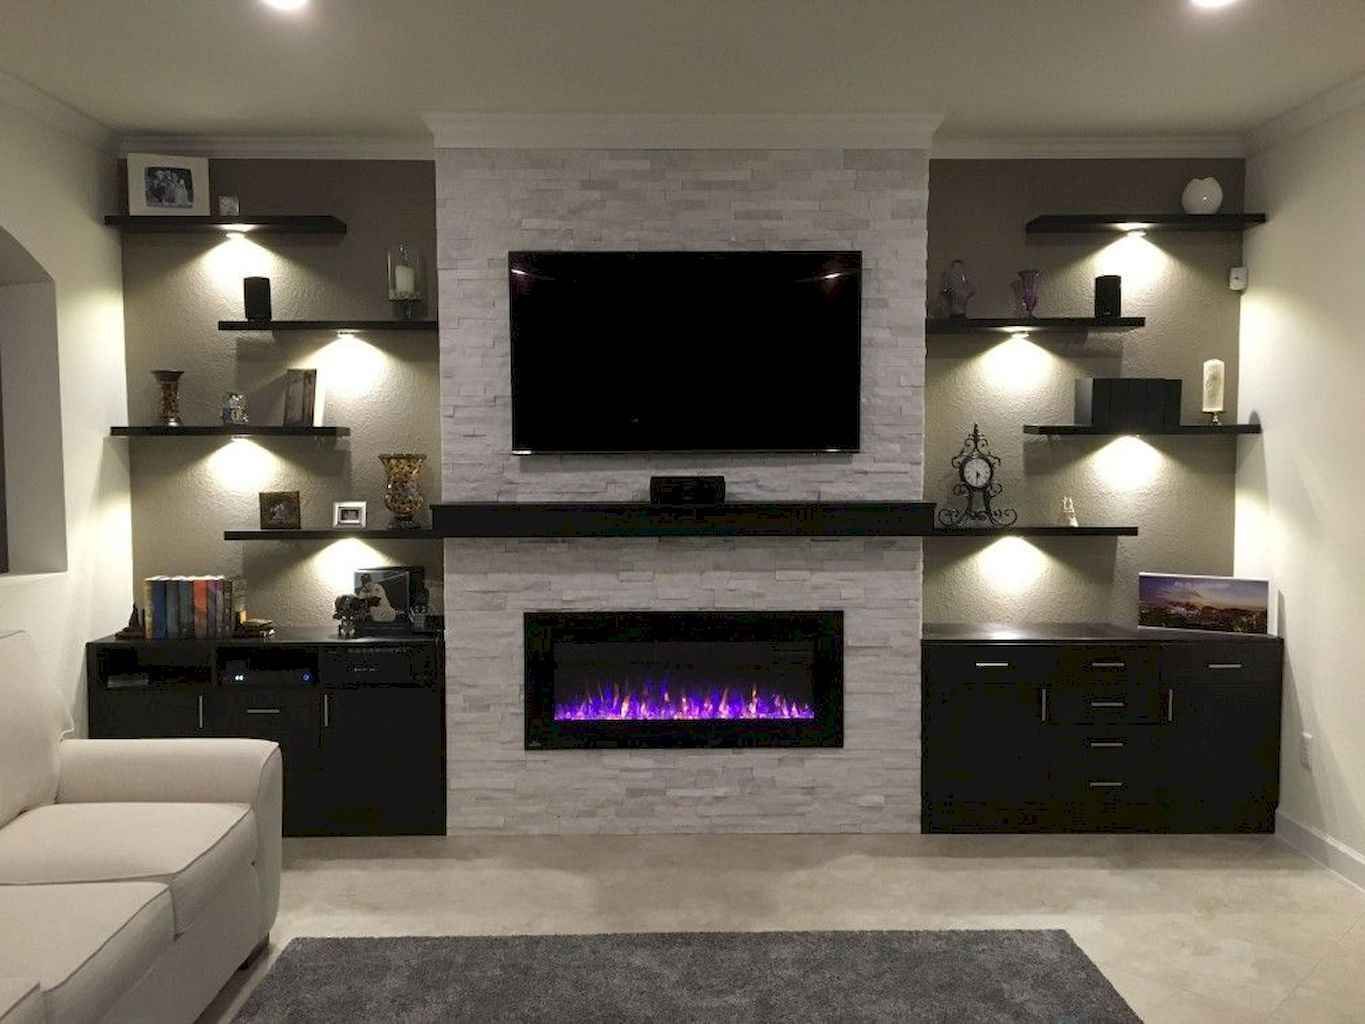 Tv Fireplace Wall Awesome 50 Diy Floating Shelves for Living Room Decorating